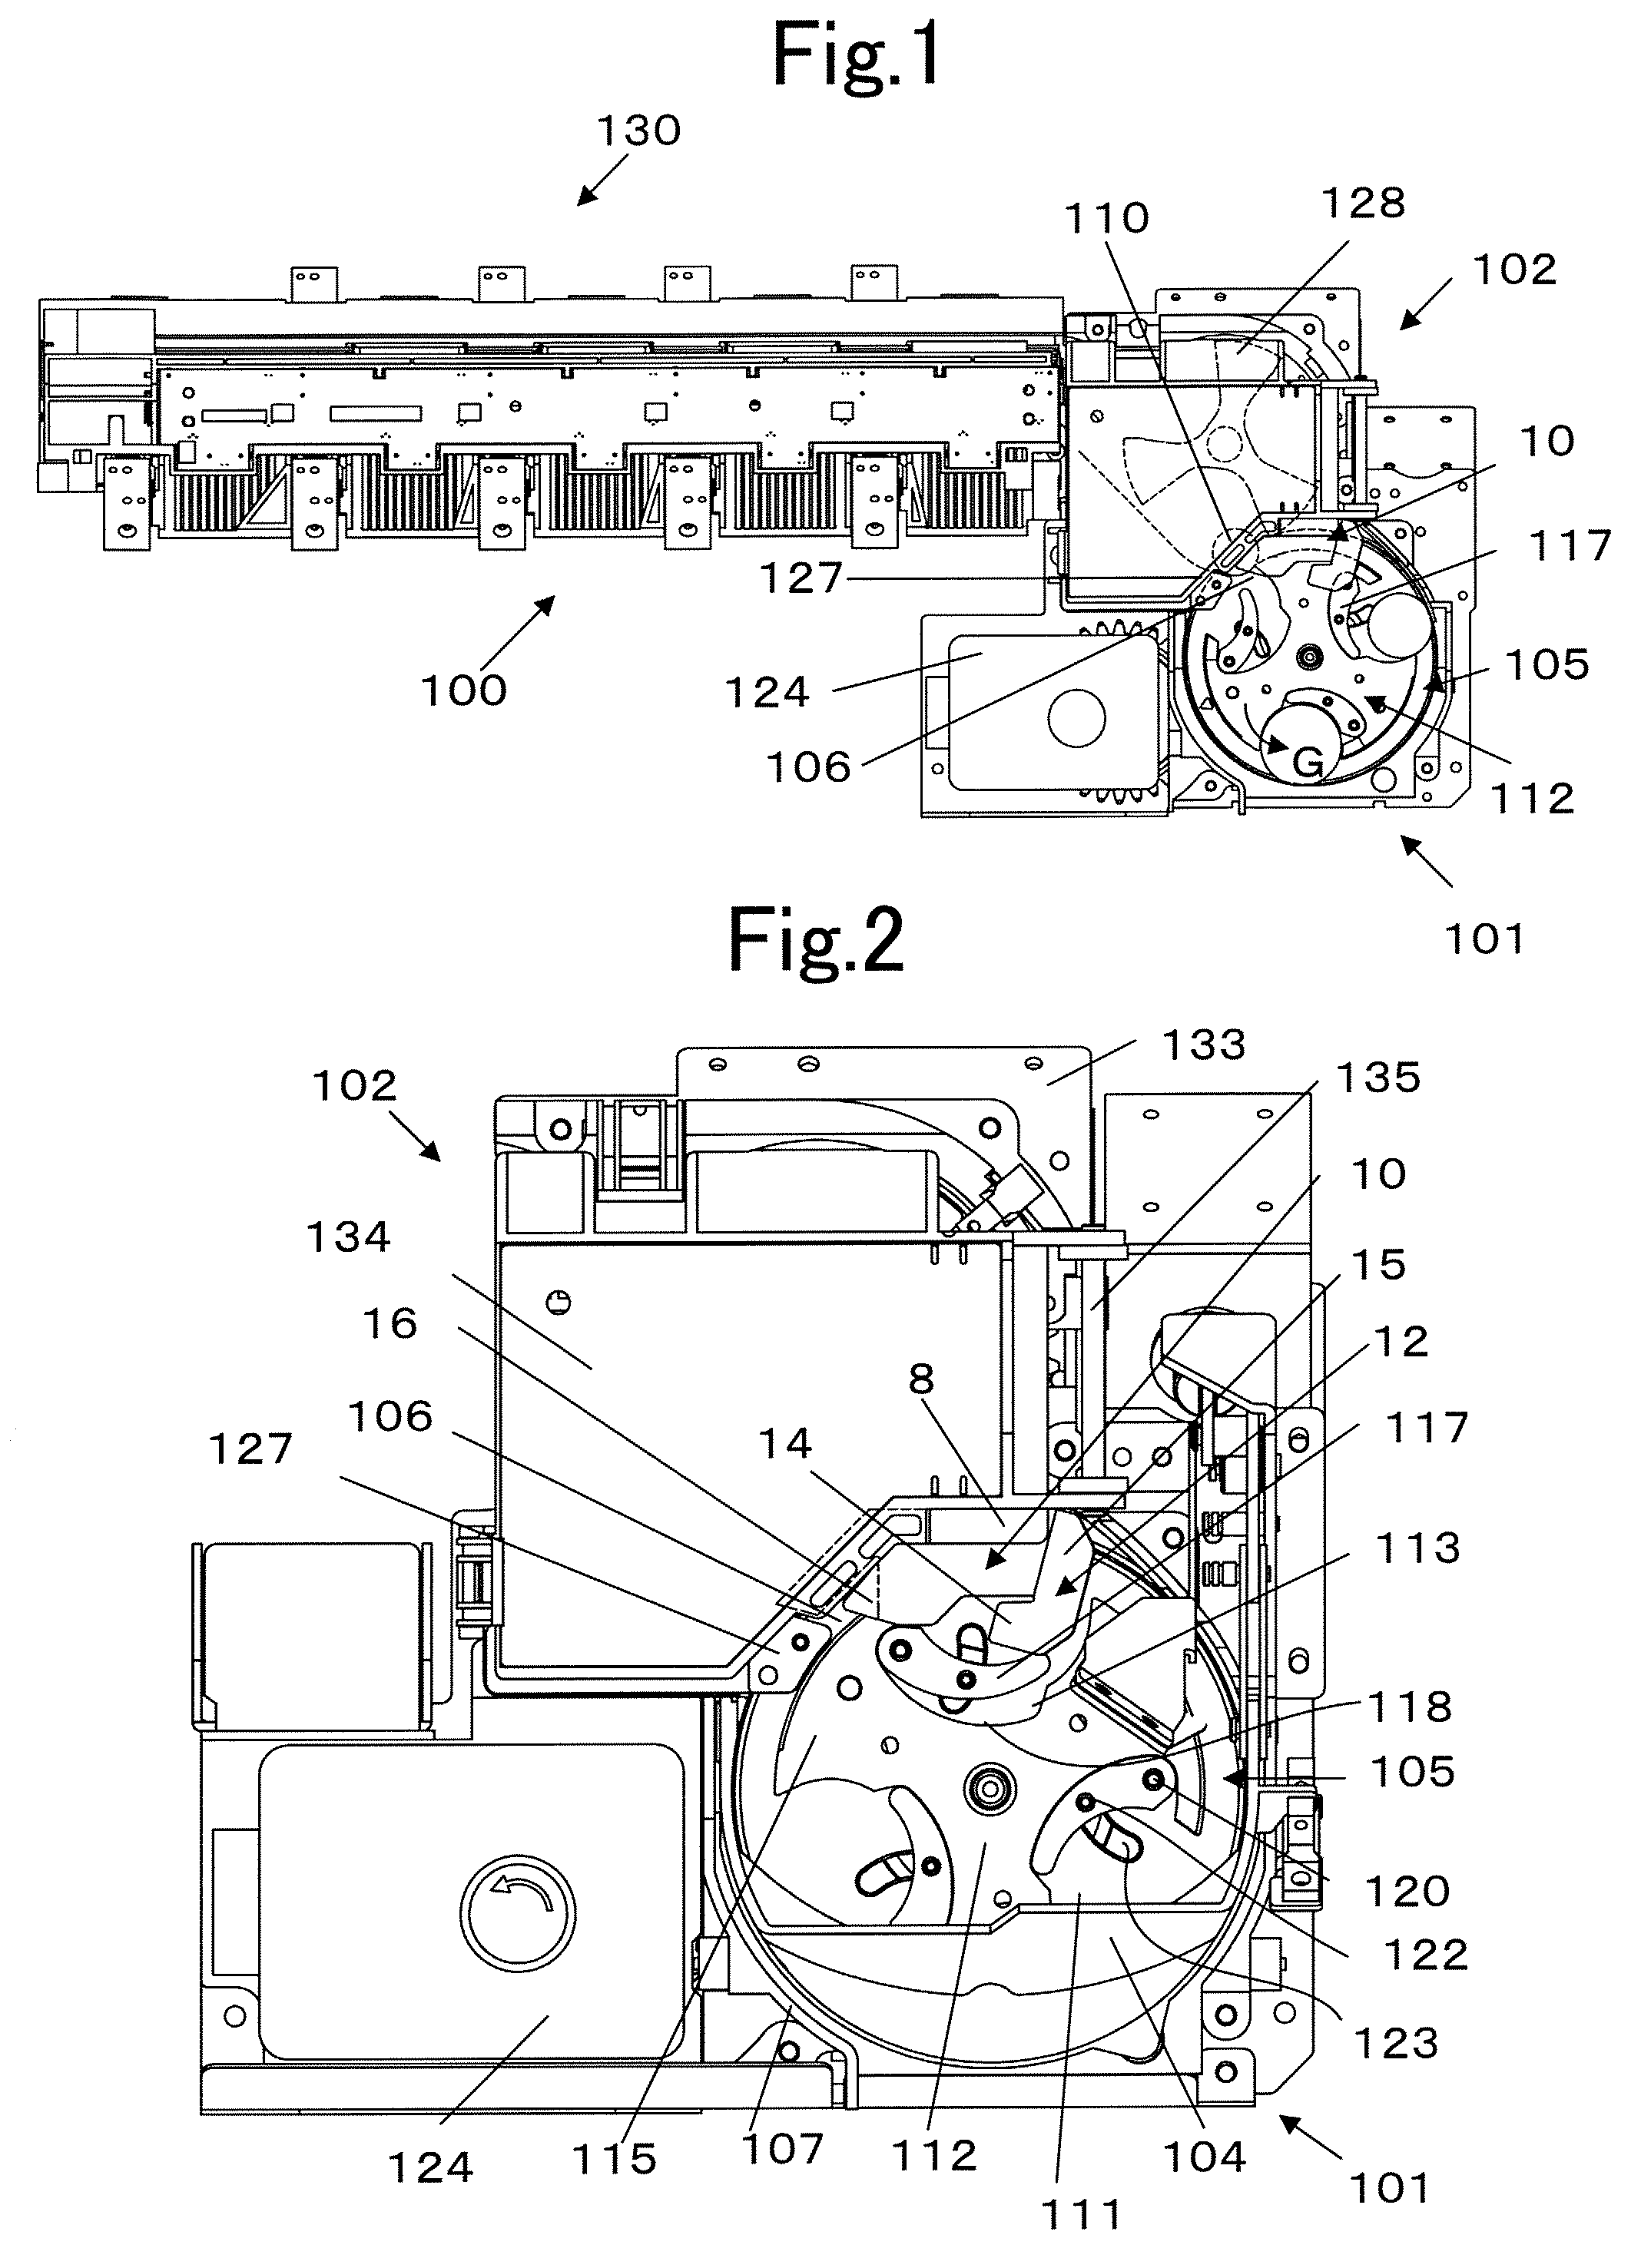 Coin feeding apparatus and method for biasing a release of coins